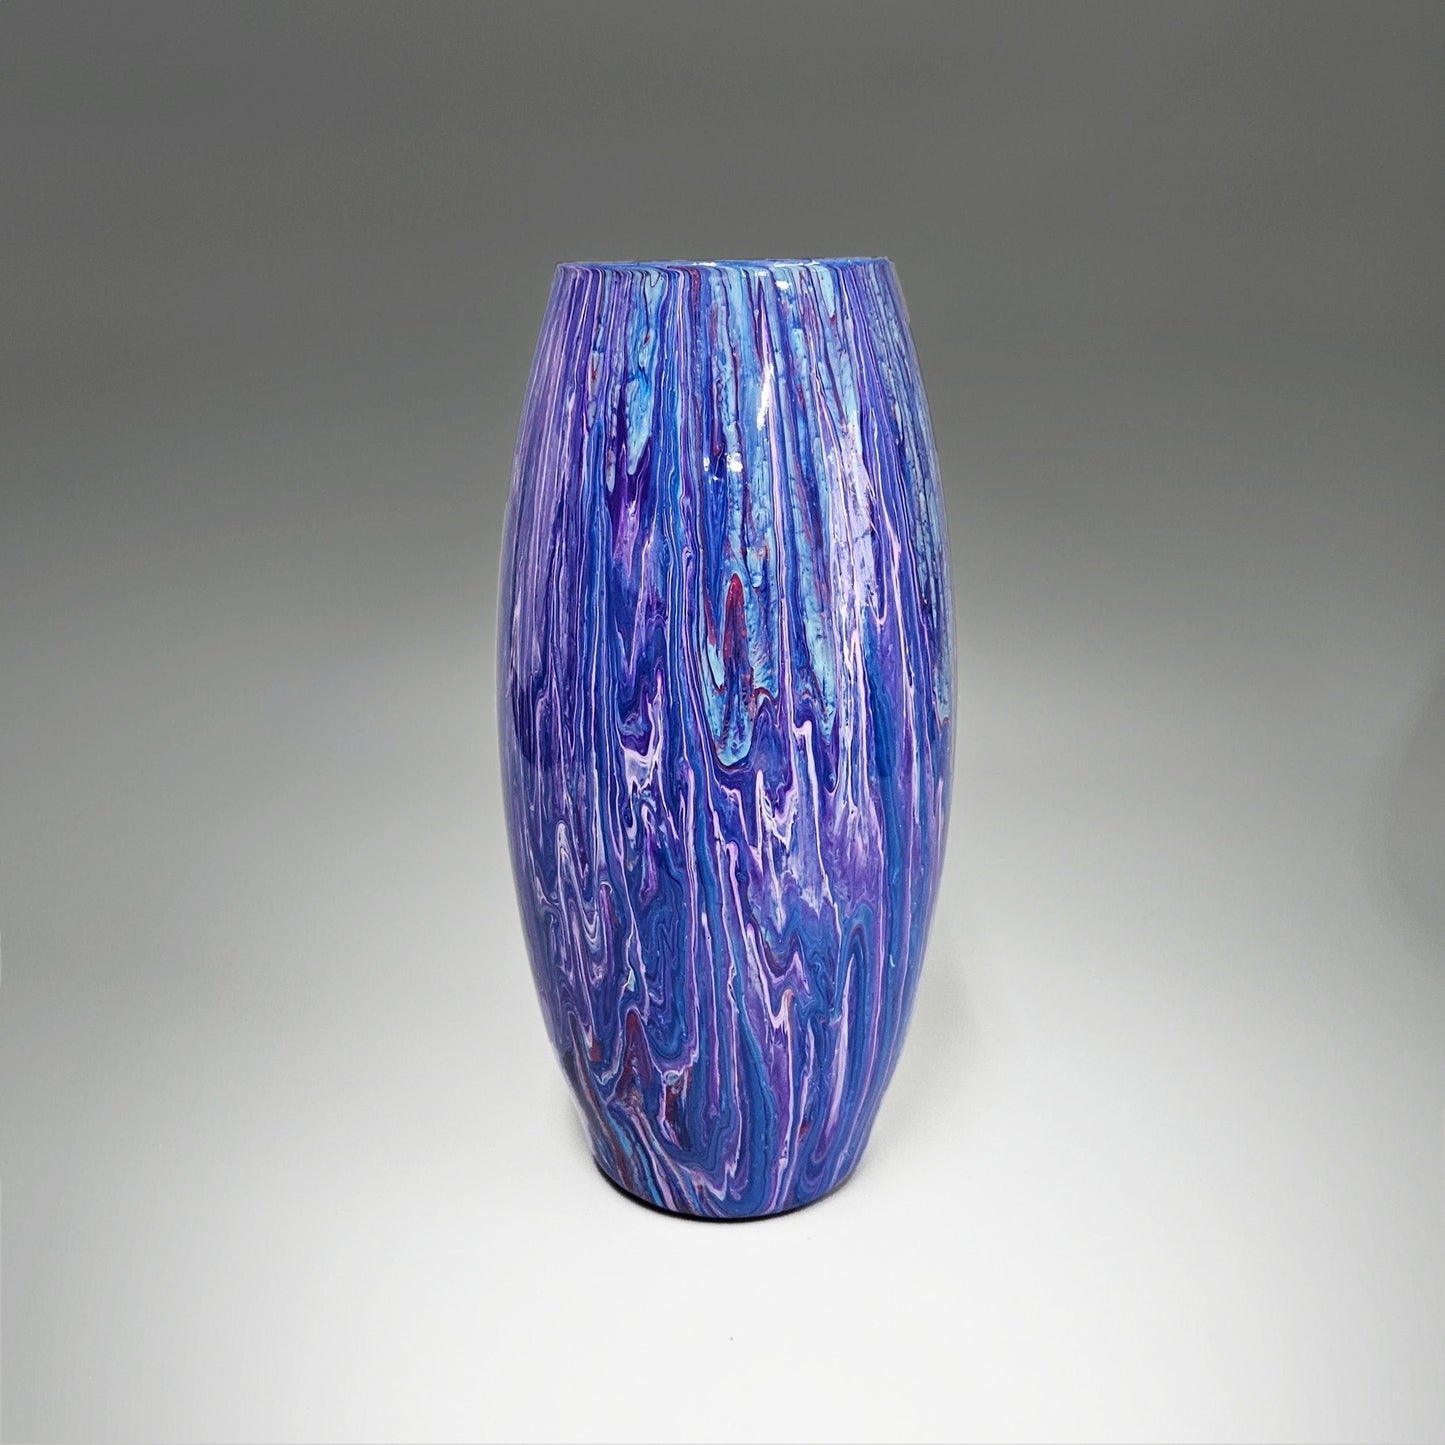 Painted Glass Art Vase in Navy Blue Aqua and Purple